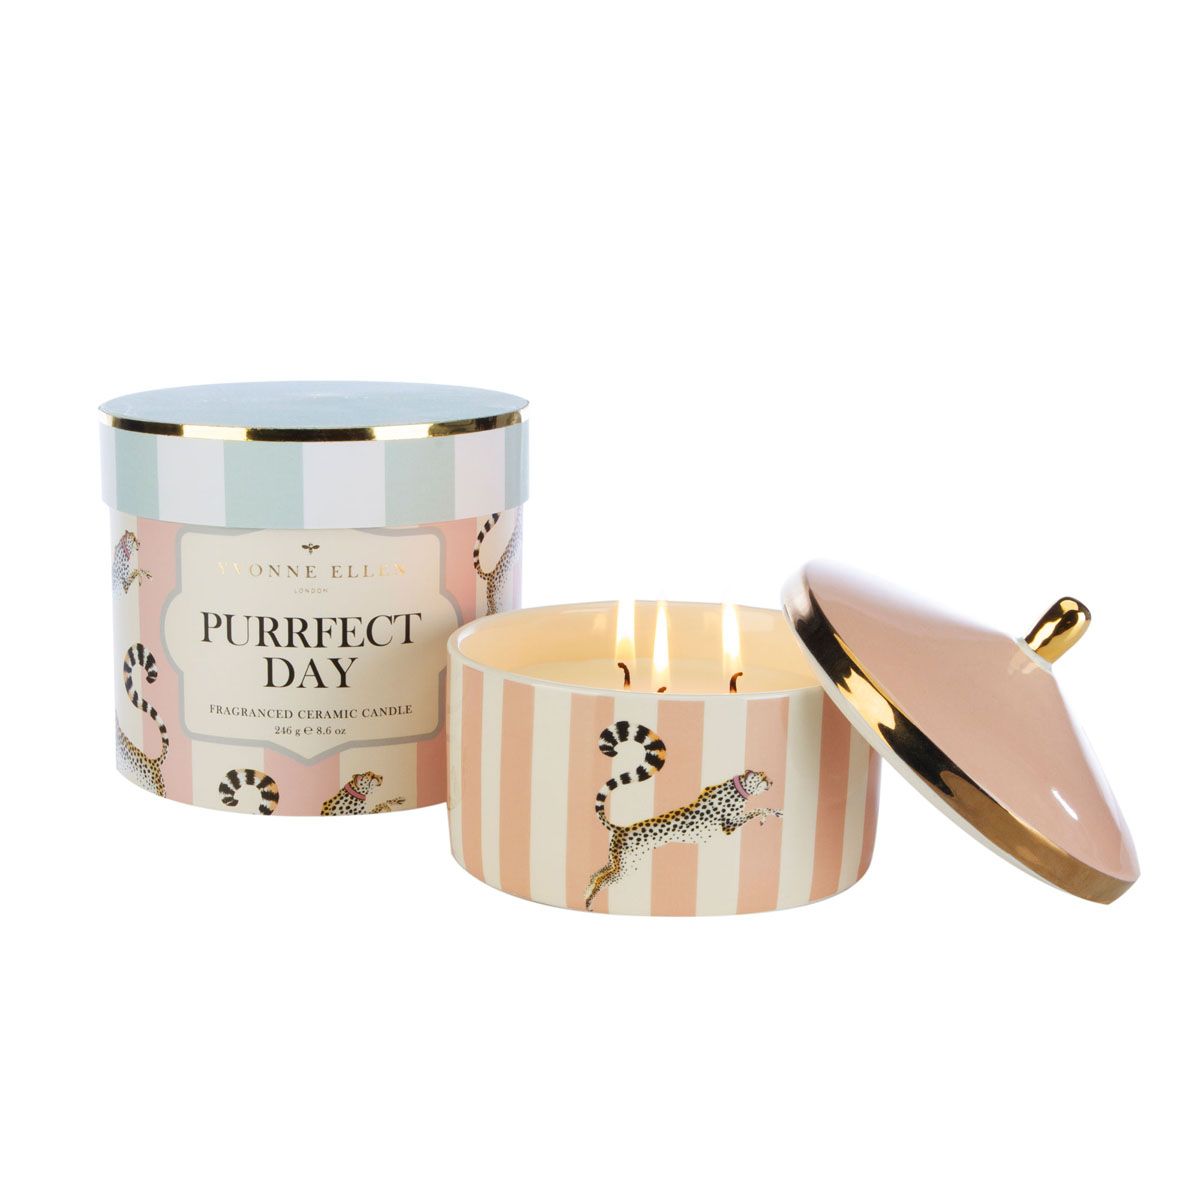 Yvonne Ellen Purrfect Day Rose & Oudh Scented 3 Wick Ceramic Lidded Candle